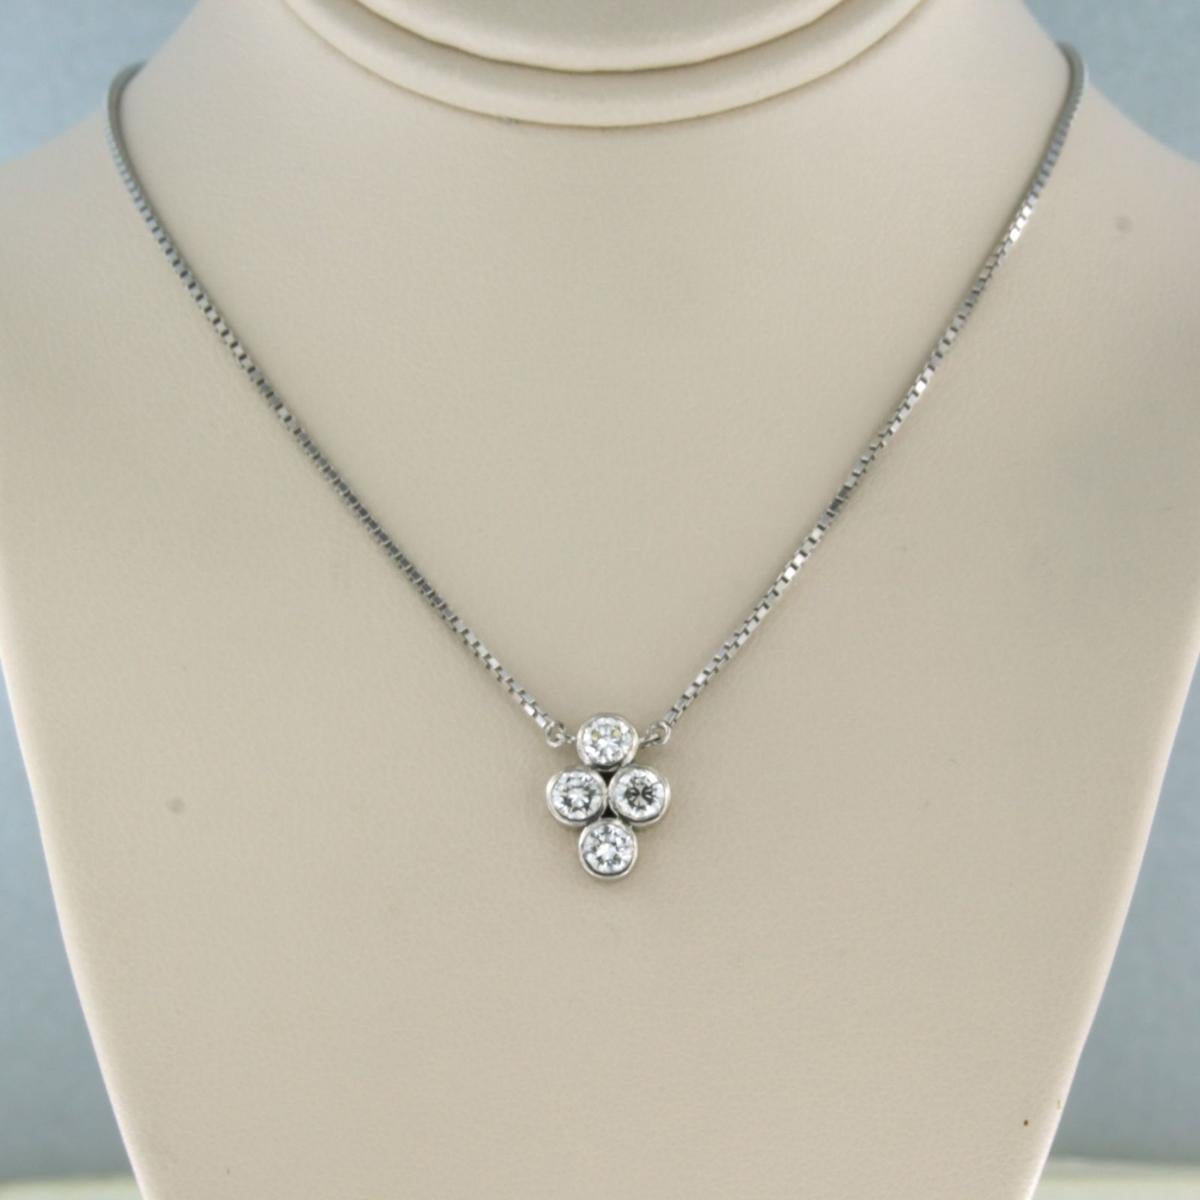 14k white gold necklace with a pendant set with brilliant cut diamonds. 0.65ct - F/G - VS - 36 cm long

detailed description

the necklace is 36 cm long and 1.0 mm wide

the pendant is 1.3 cm high and 1.0 cm wide

total weight: 3.5 grams

occupied